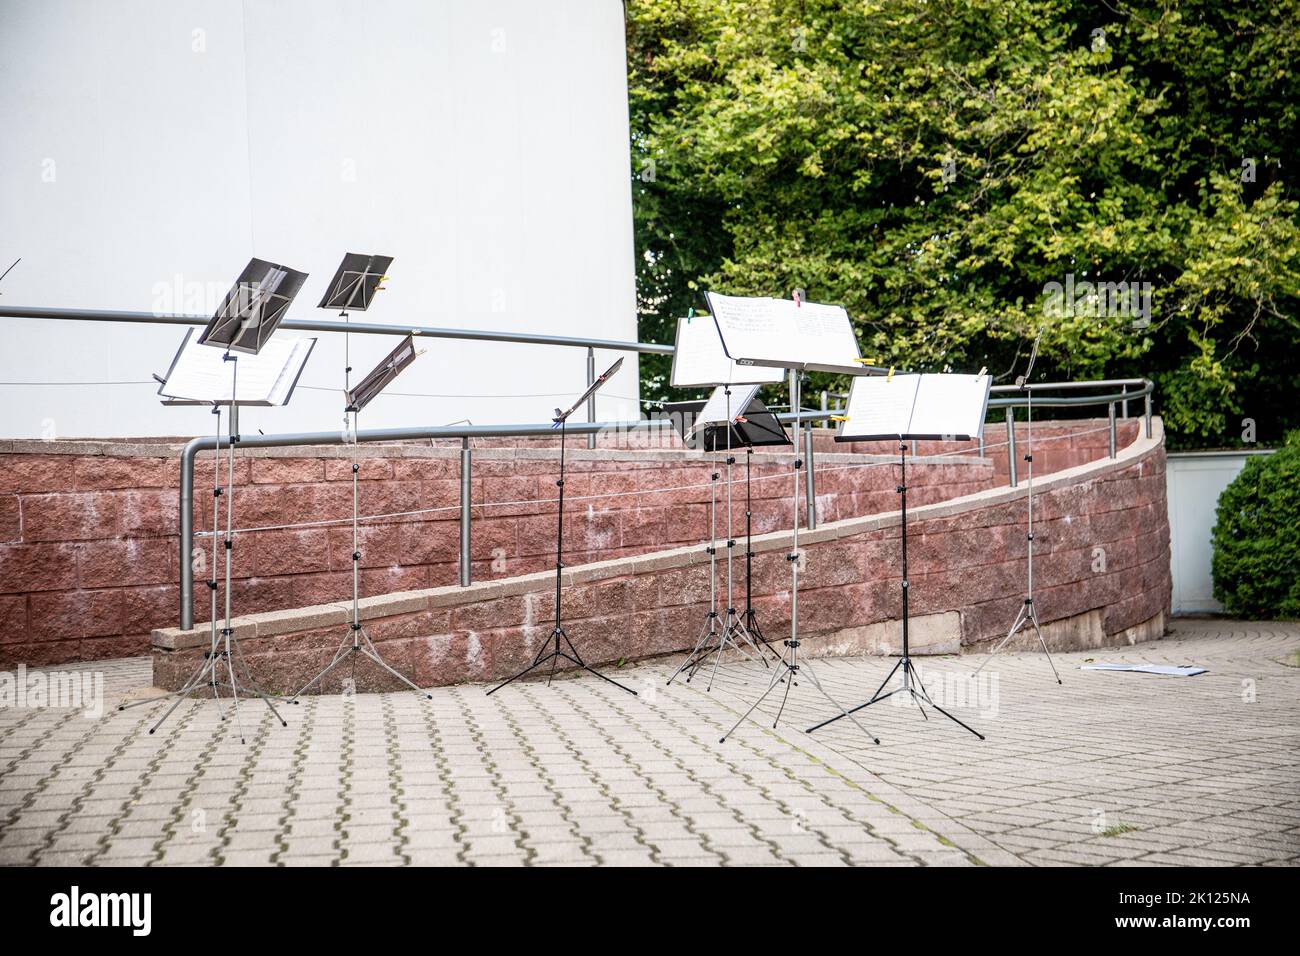 Many music stands for an orchestra in the open air. Stock Photo